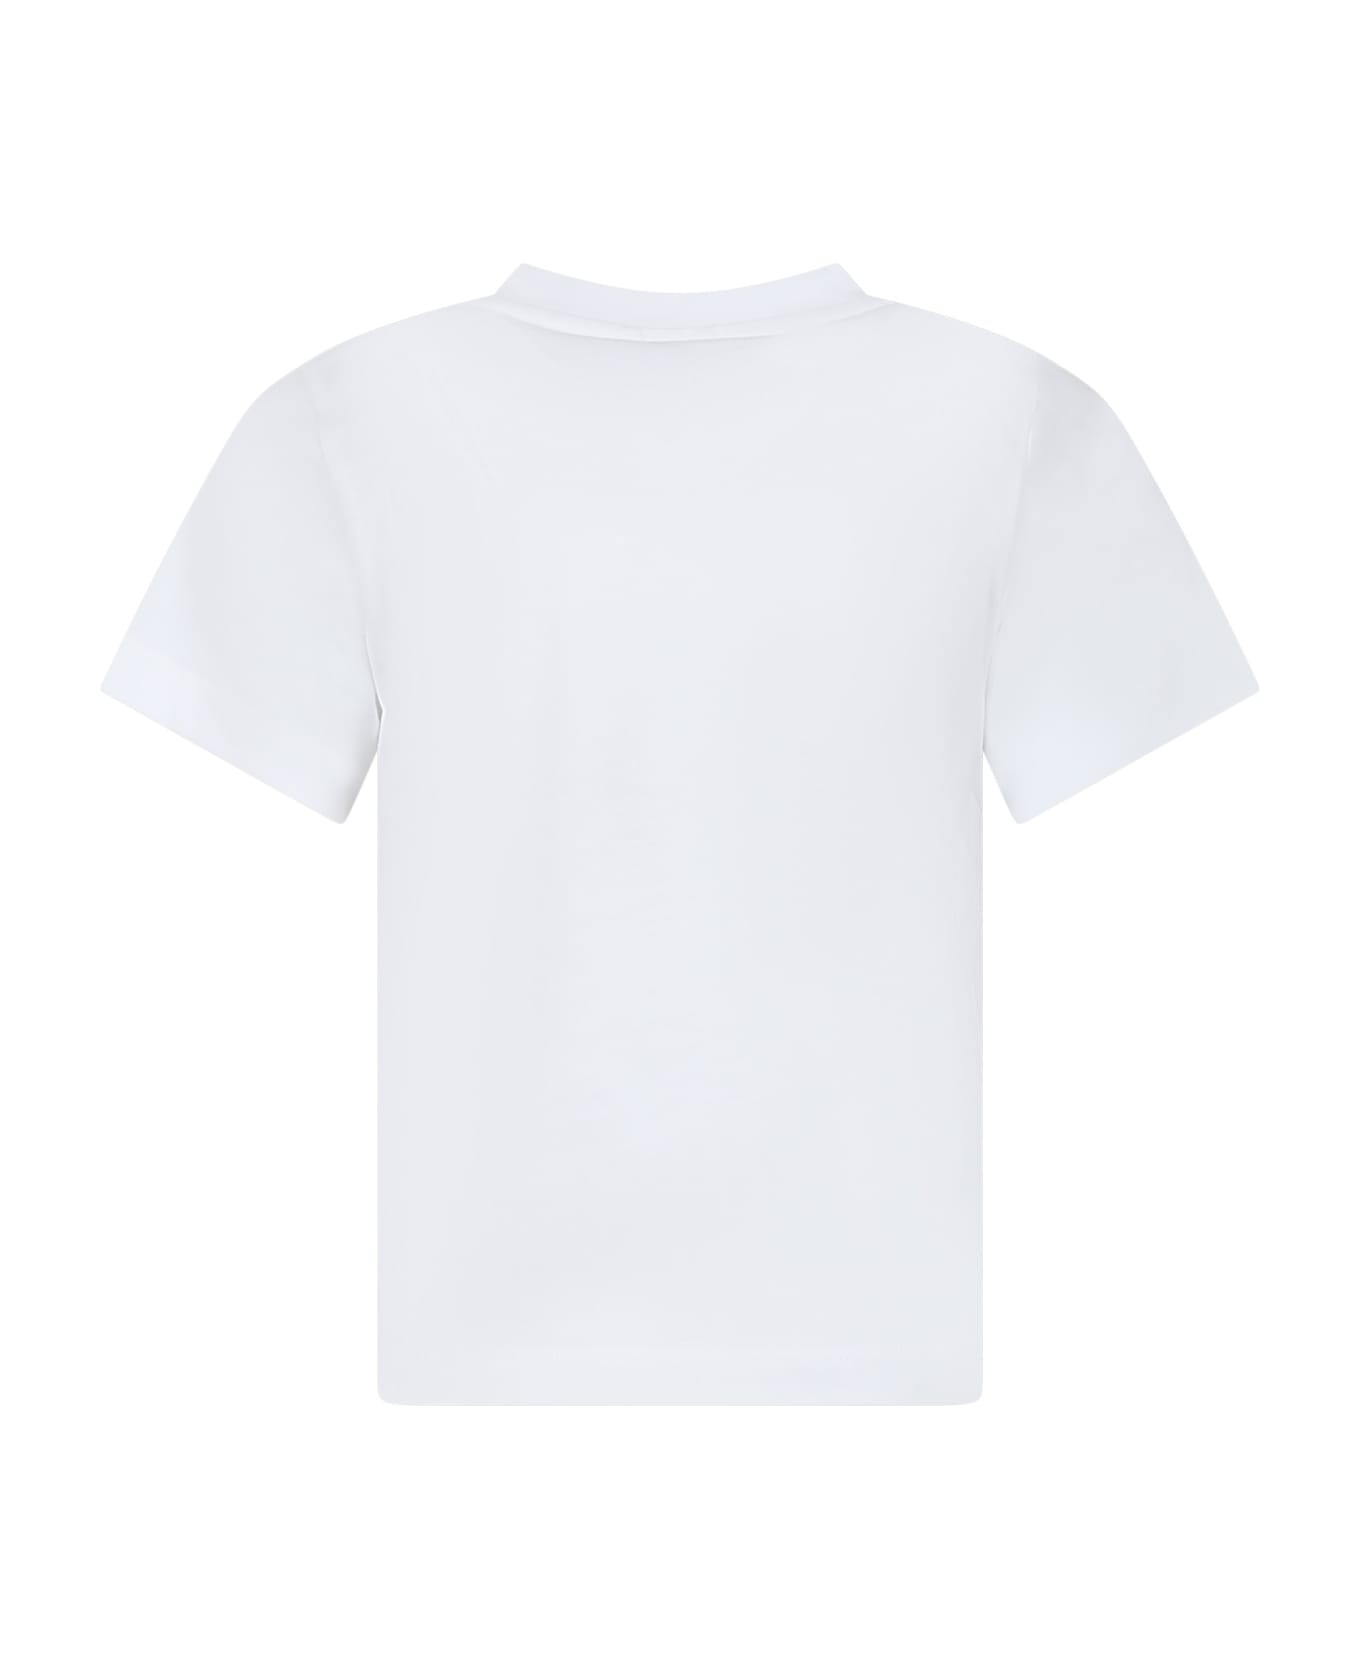 Stella McCartney Kids White T-shirt For Boy With Multicolor Print - White